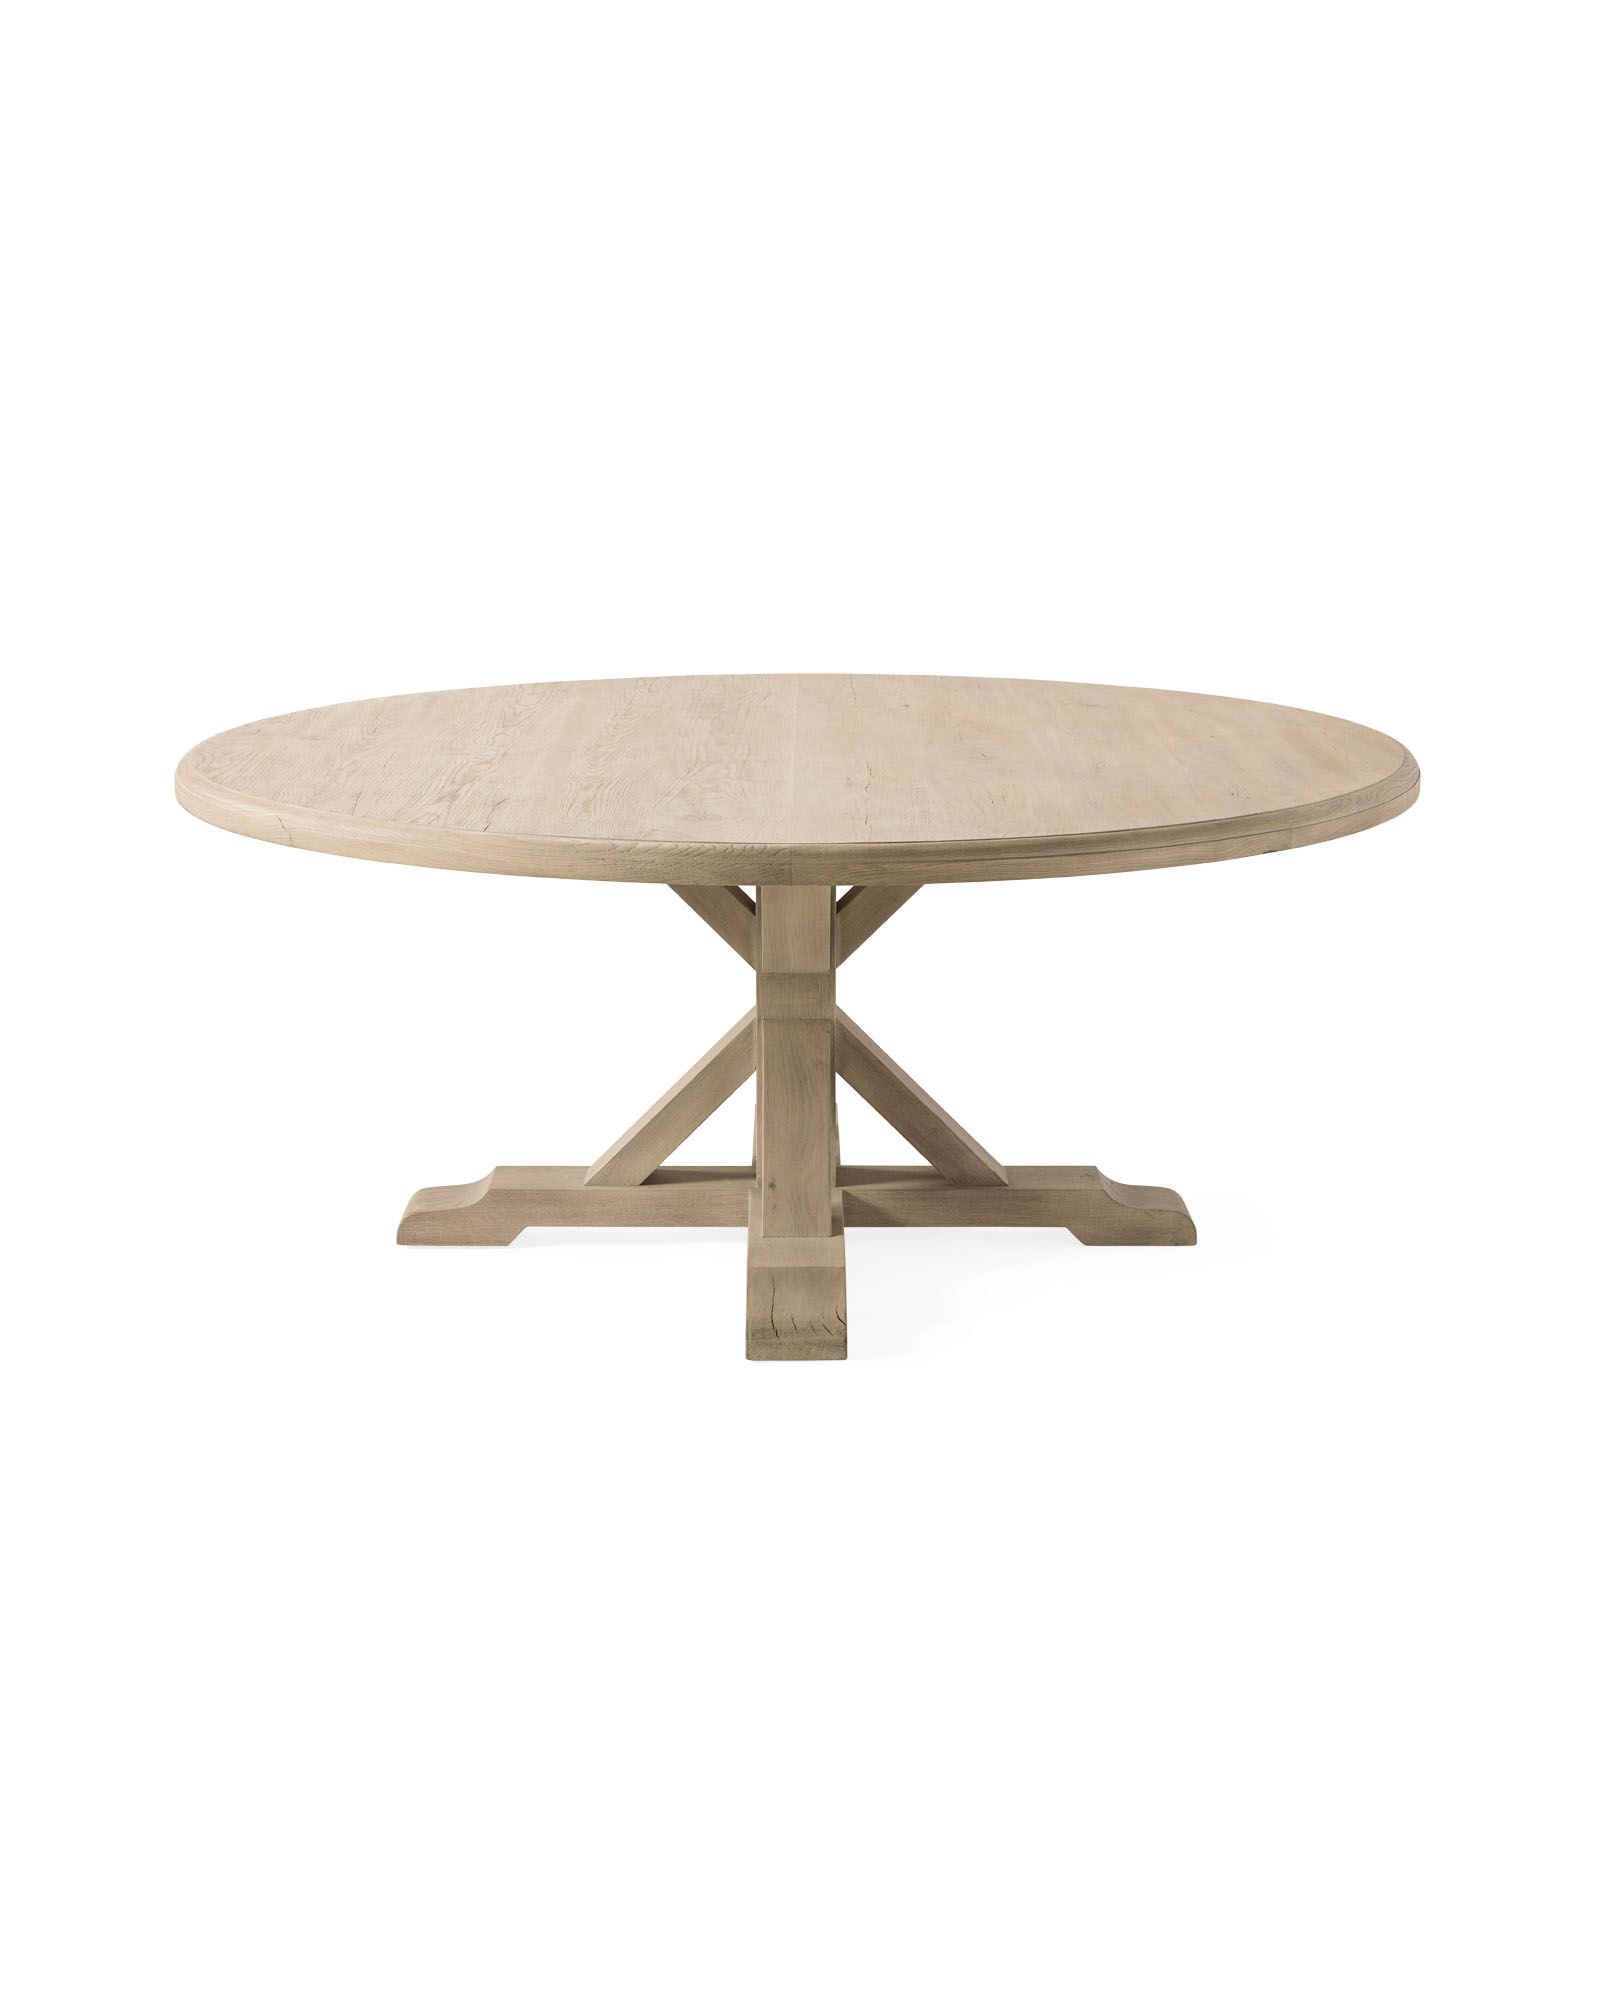 Lake House Round Dining Table | Serena and Lily